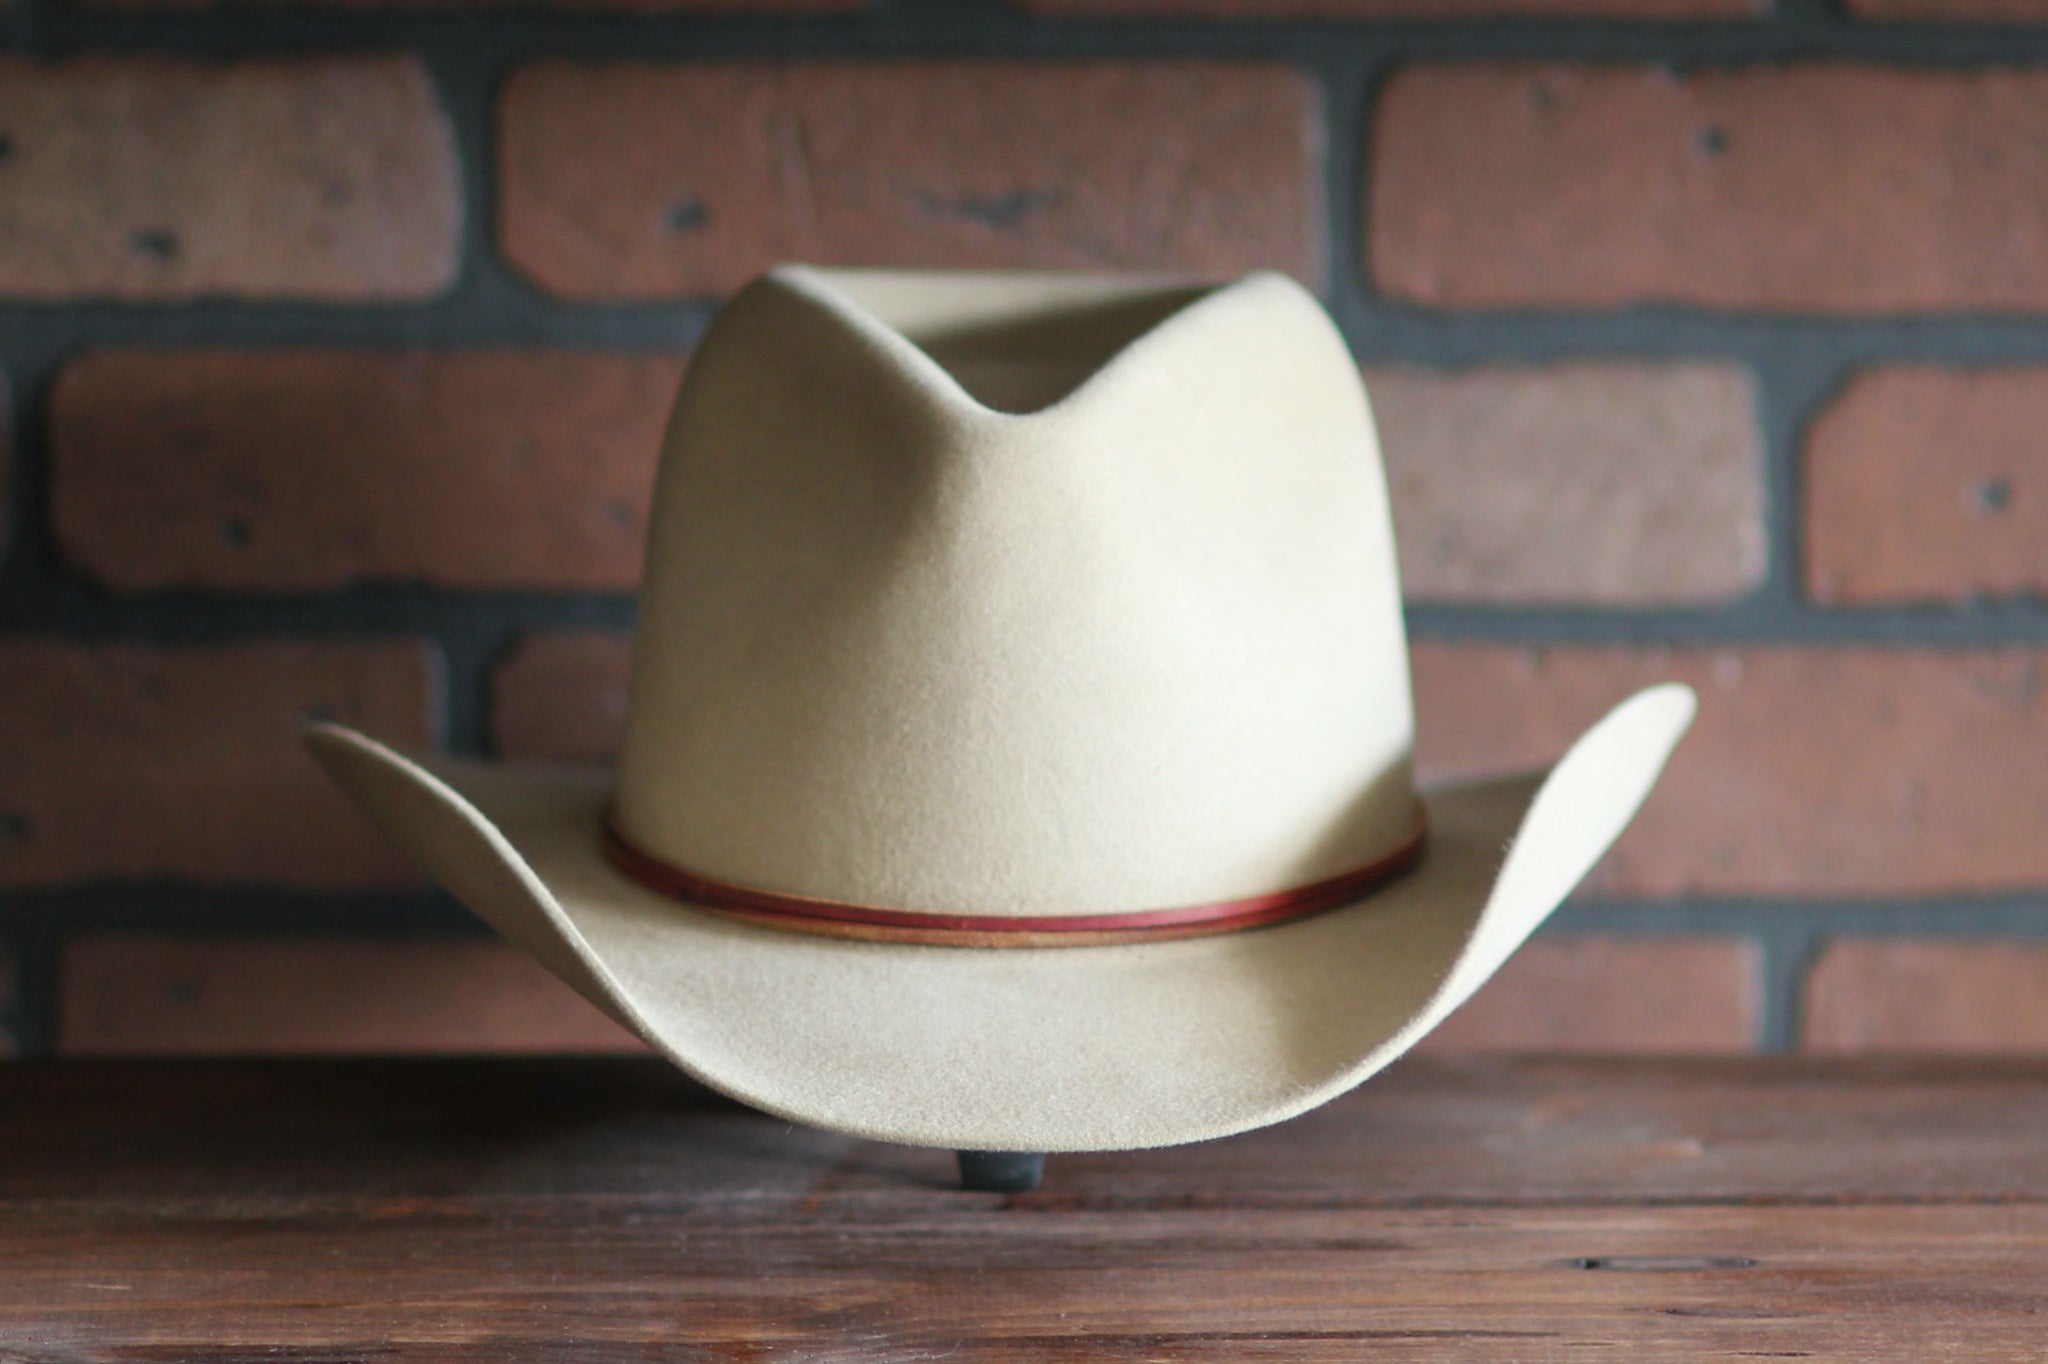 Replica western hat worn inspired by Robert Duvall's character in the film "Open Range"